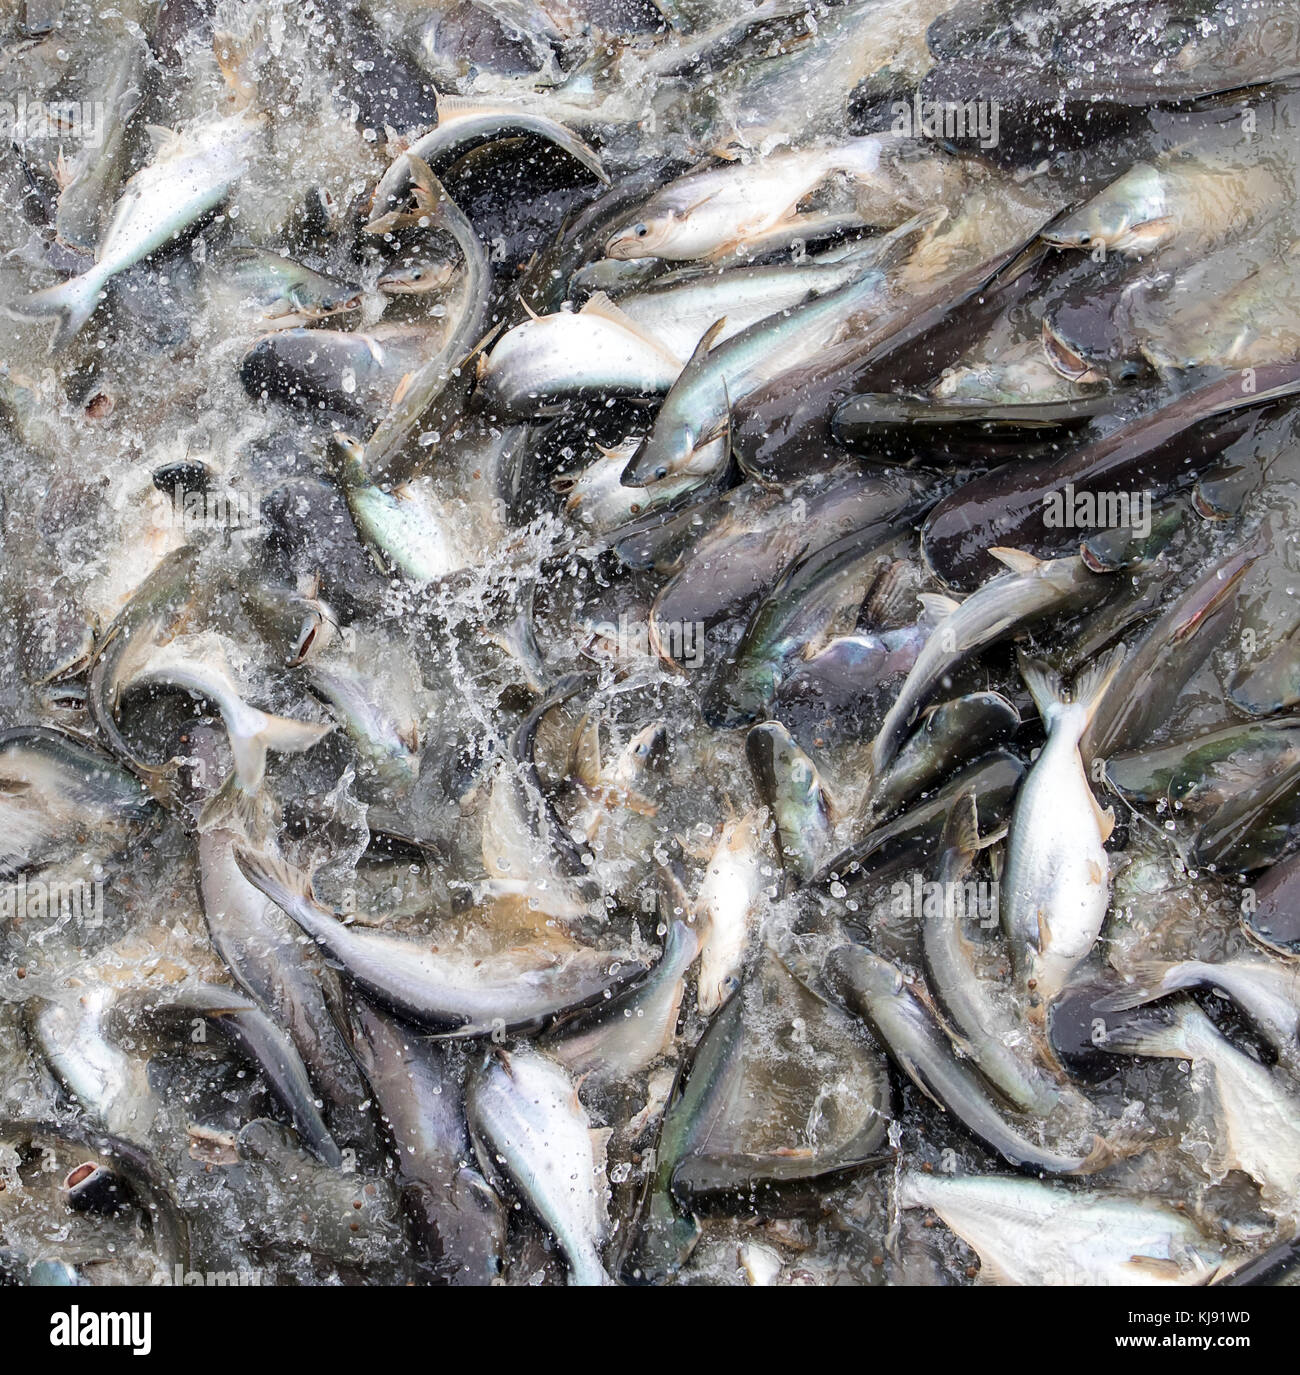 Many different fish competing for food in river. Fish jump in water for food in Chao Phraya River Bangkok, Thailand. Catfish and carp bread feeding in Stock Photo